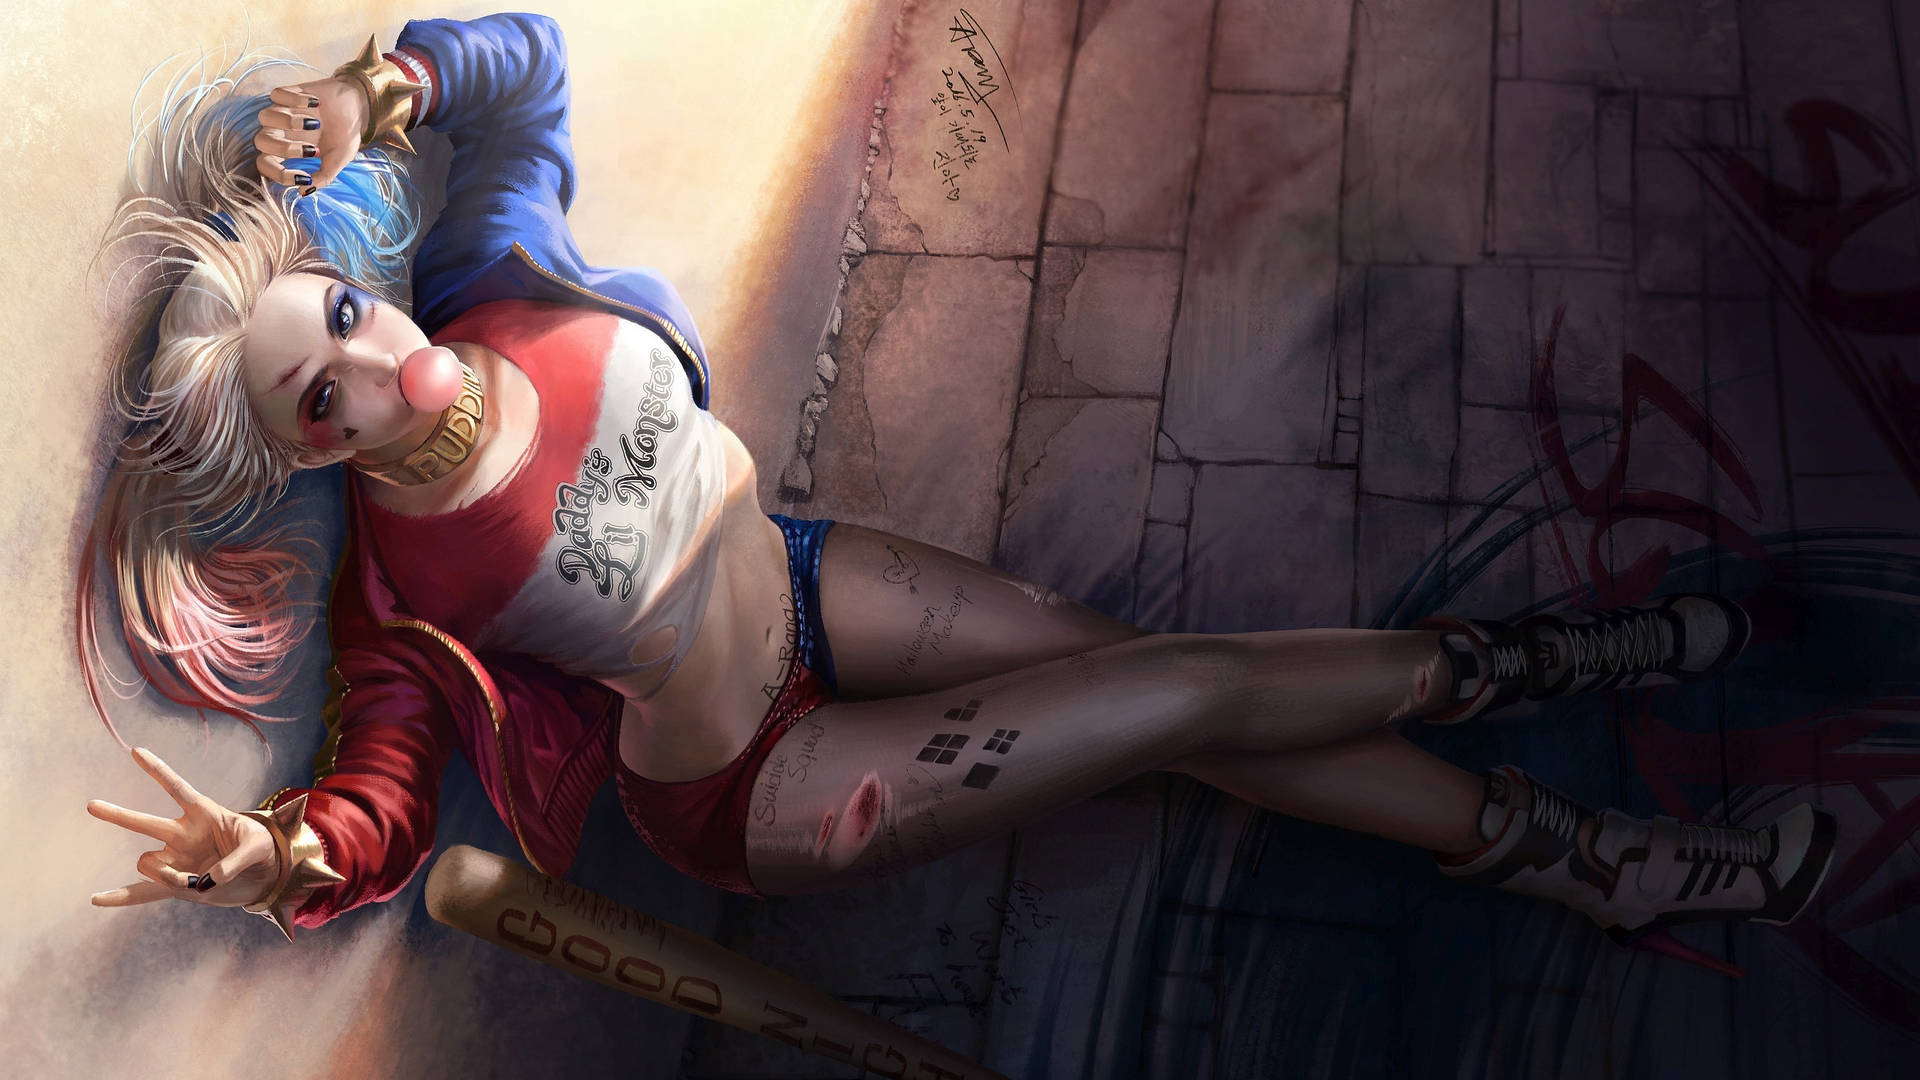 "Sexy Harley Quinn from Suicide Squad" Wallpaper